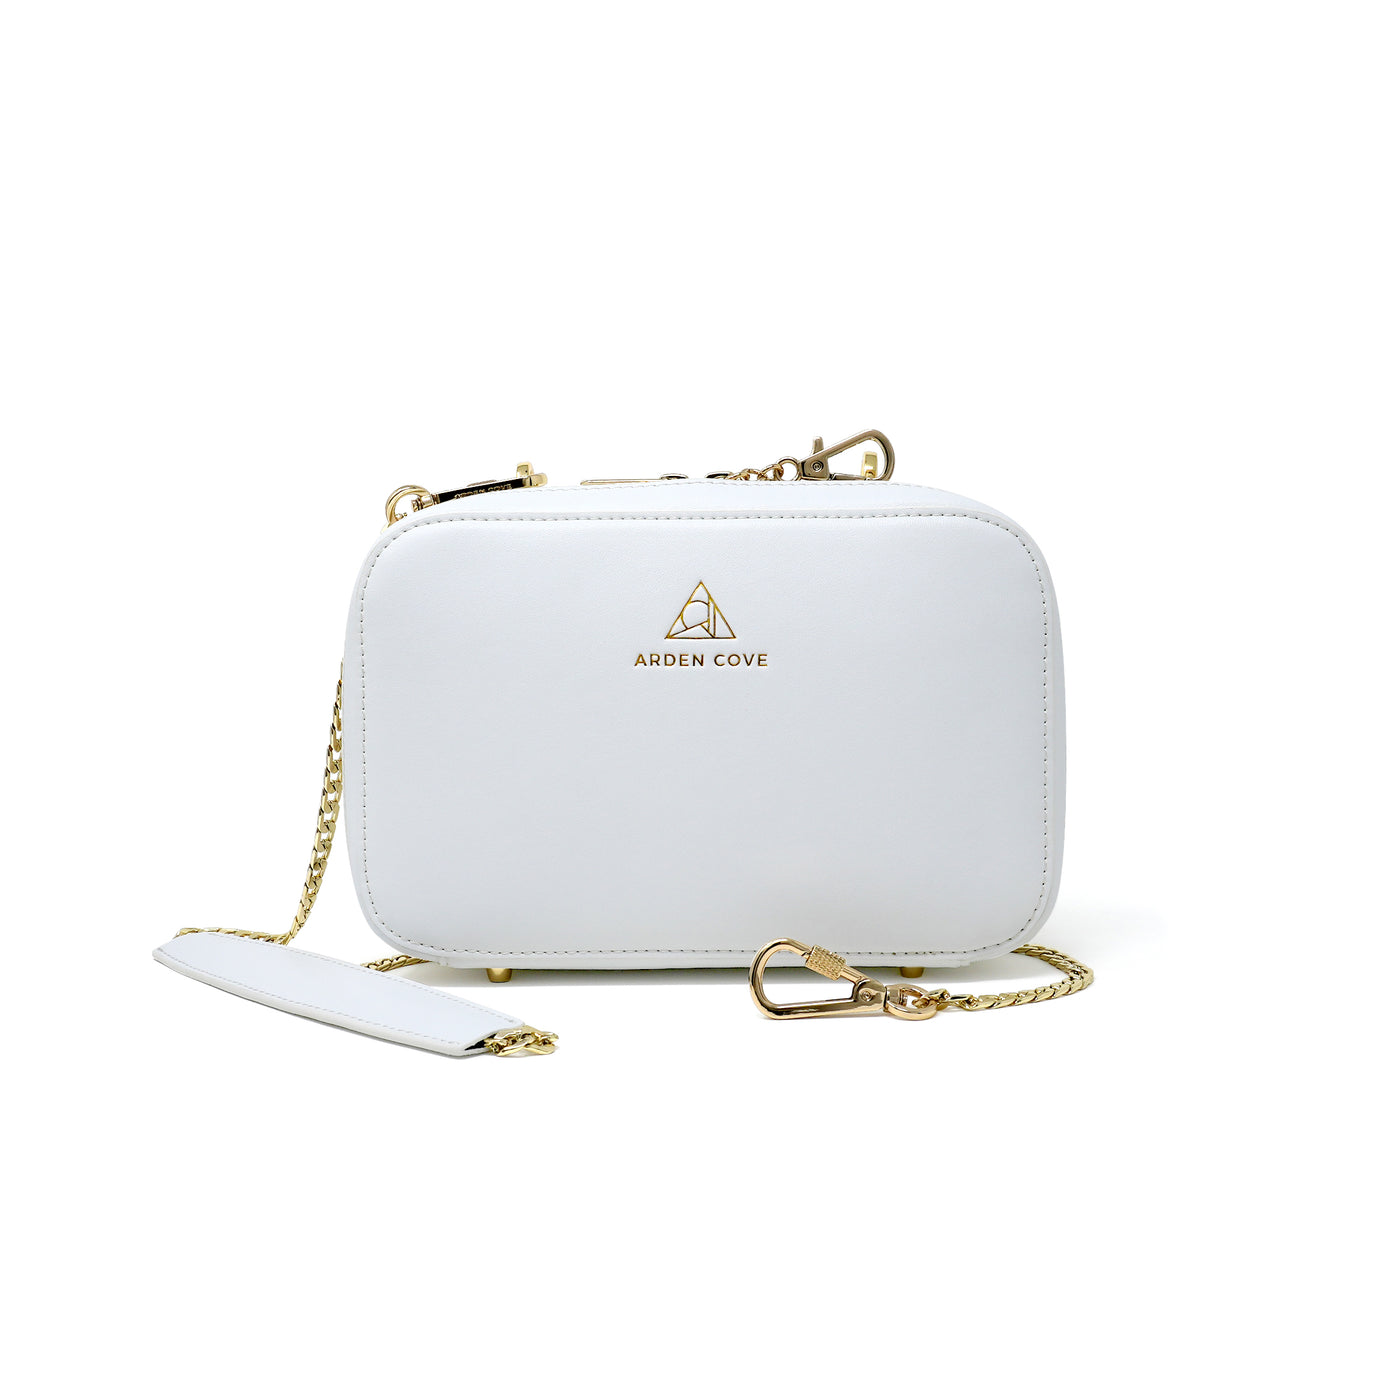 Anti-theft Water-resistant Travel Crossbody - Elise Crossbody in White Gold with slash-resistant chain & locking clasps straps - front view - Arden Cove